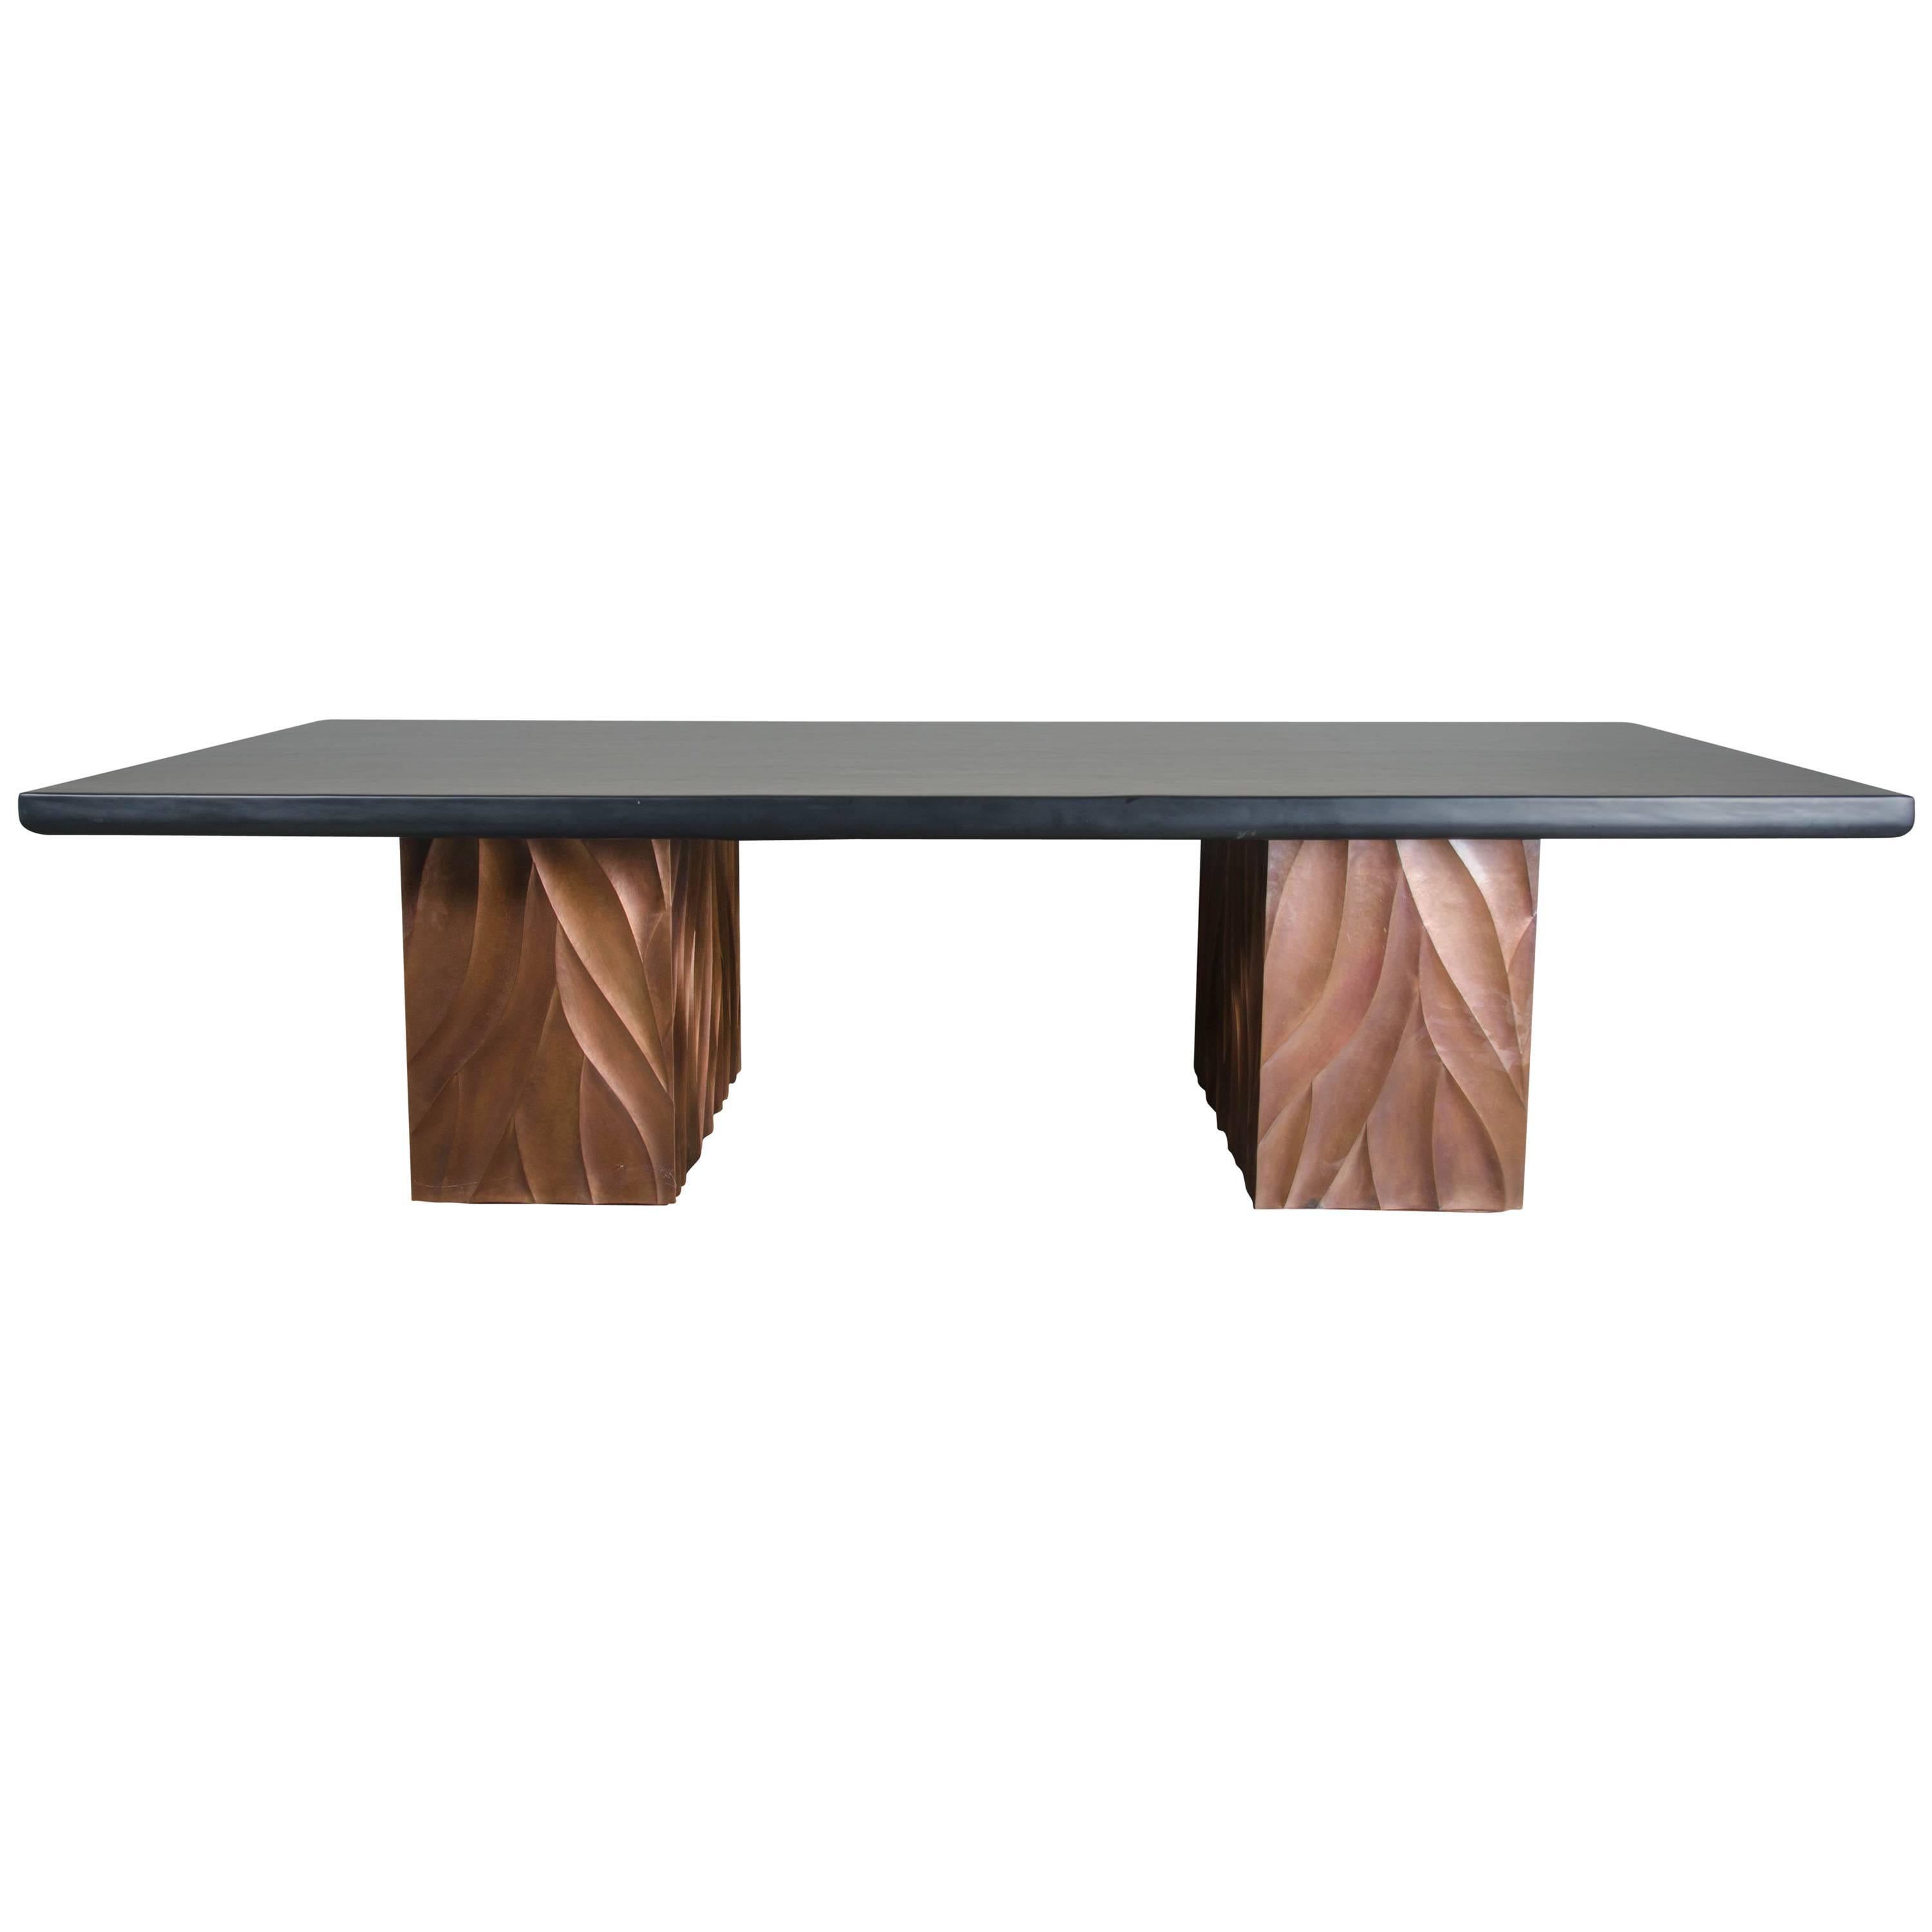 Za Xian Dining Table Base ‘Pair’, Antique Copper by Robert Kuo, Limited Edition For Sale